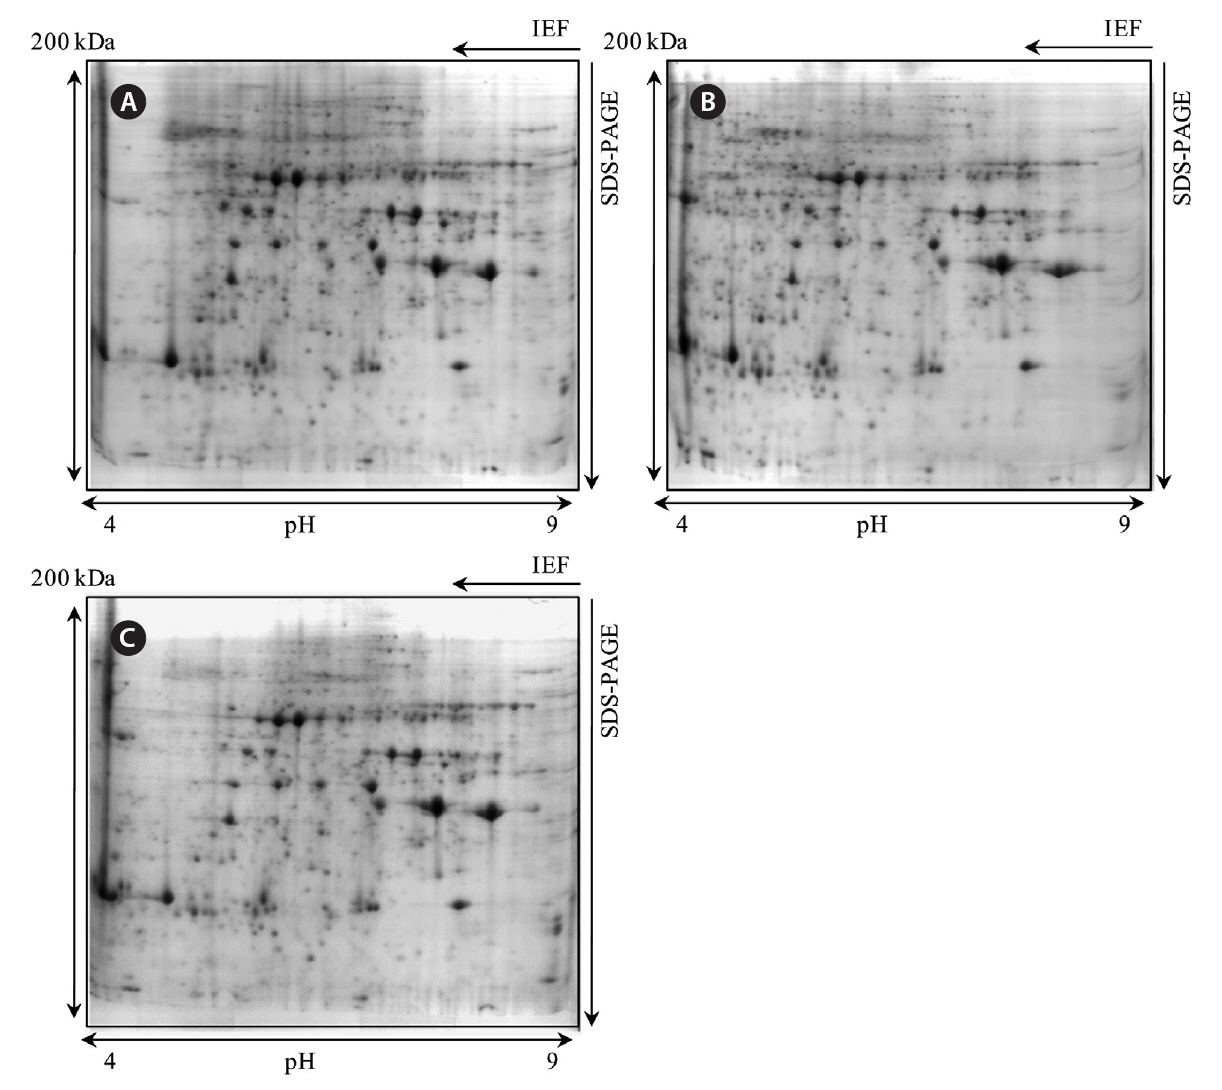 Two dimensional electrophoresis gel images of Prorocentrum micans growing under autotrophic (A) mixotrophic (B) and mixotrophic-autotrophic transition conditions (C). IEF isoelectric focusing; SDS-PAGE sodium dodecyl sulfate-polyacrylamide gel electrophoresis.